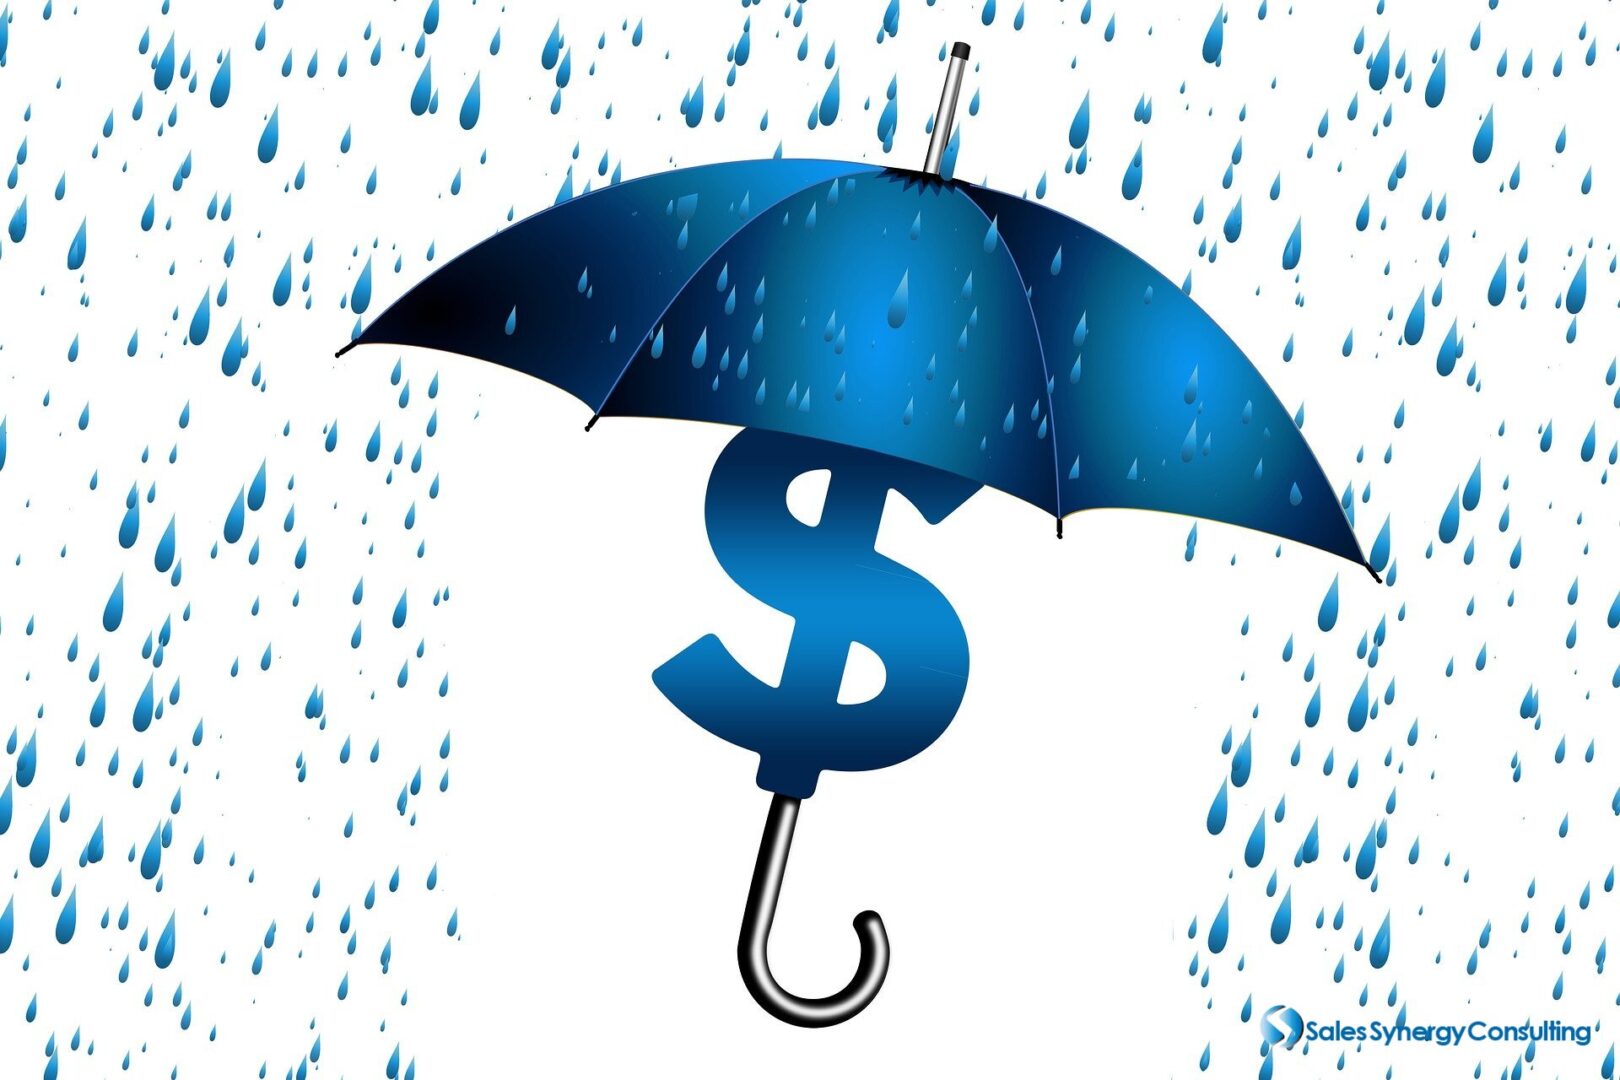 Graphics of a blue umbrella with a dollar sign handle showered by blue raindrops